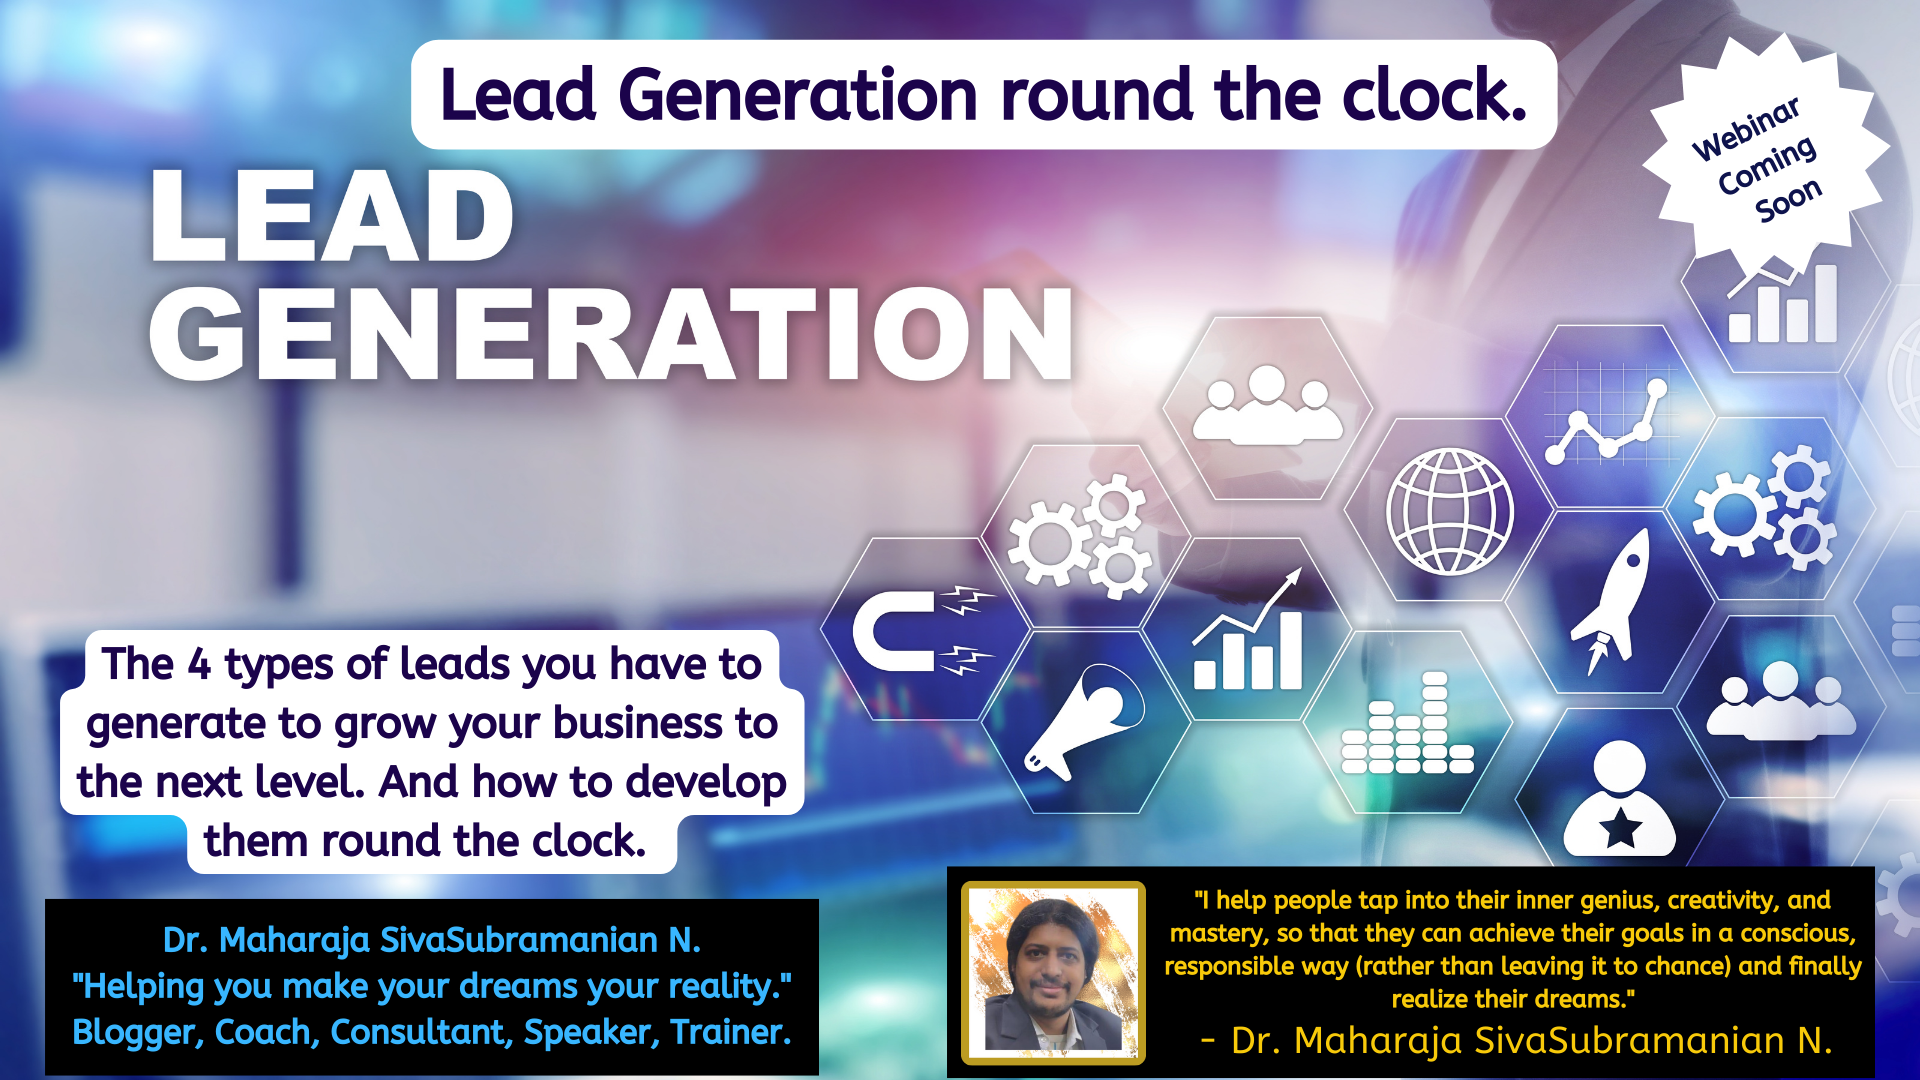 Lead Generation round the clock. – Upcoming free webinar.